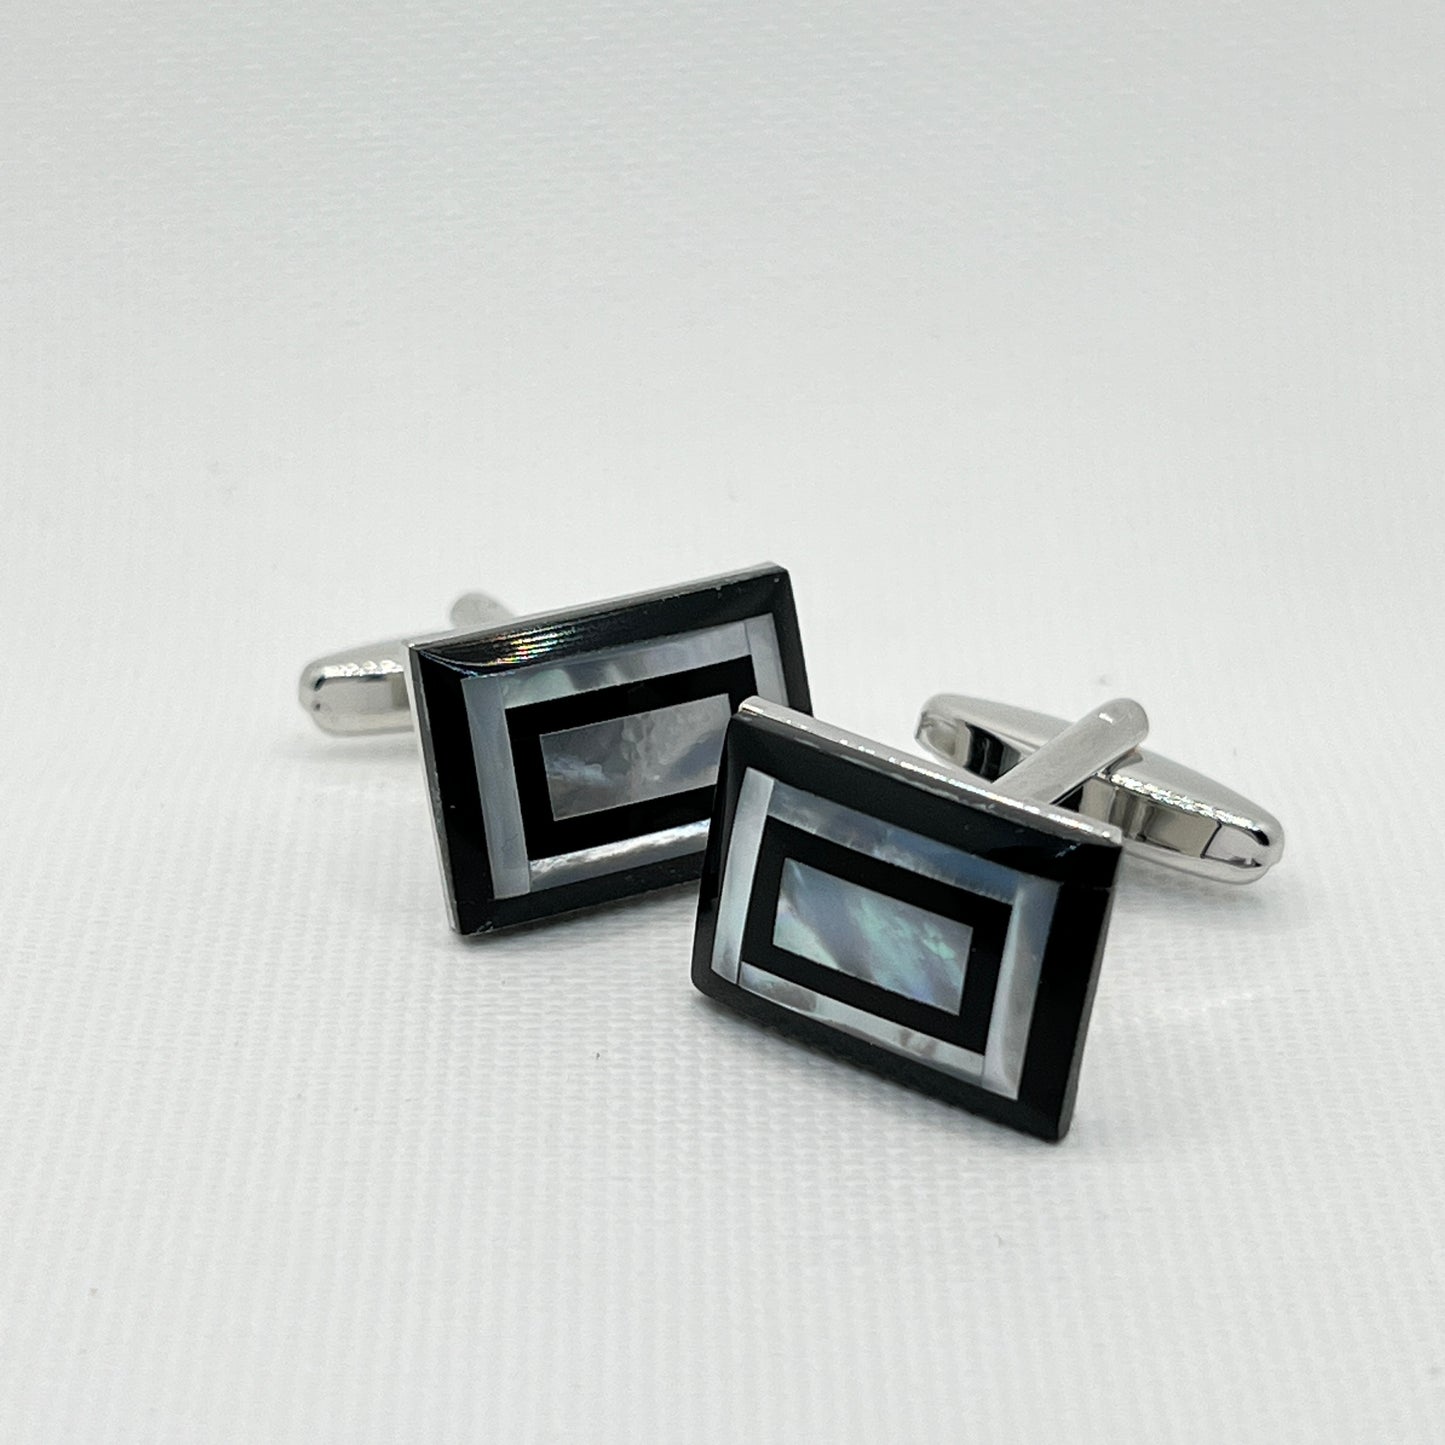 Tasker & Shaw | Luxury Menswear | Silver cufflink with black and mother of pearl concentric pattern